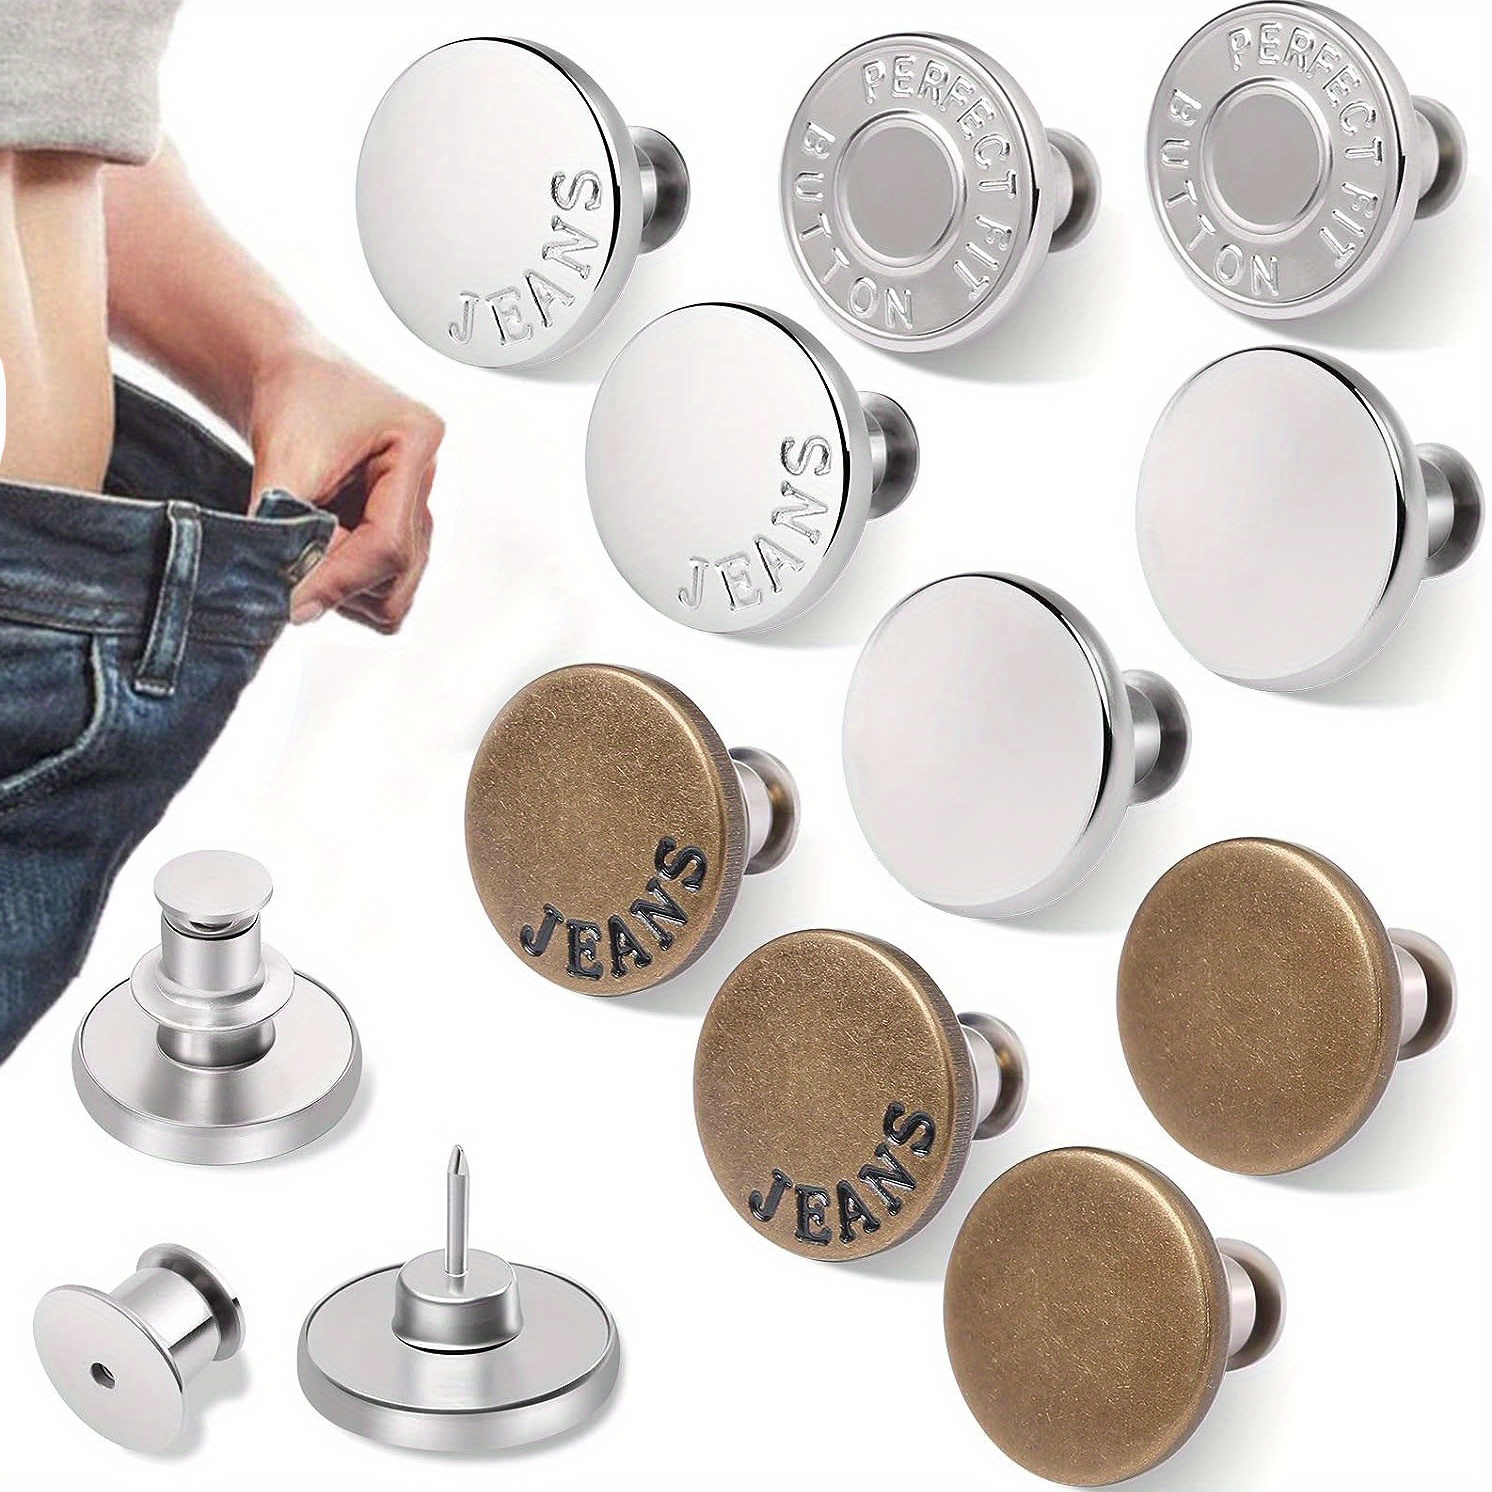 20 Sets Button Pins for Jeansmultifunctional Jean Button ReplacementNo Sew and No Tools Instant Jean Button Pins for Pantssimple Installation,reusable